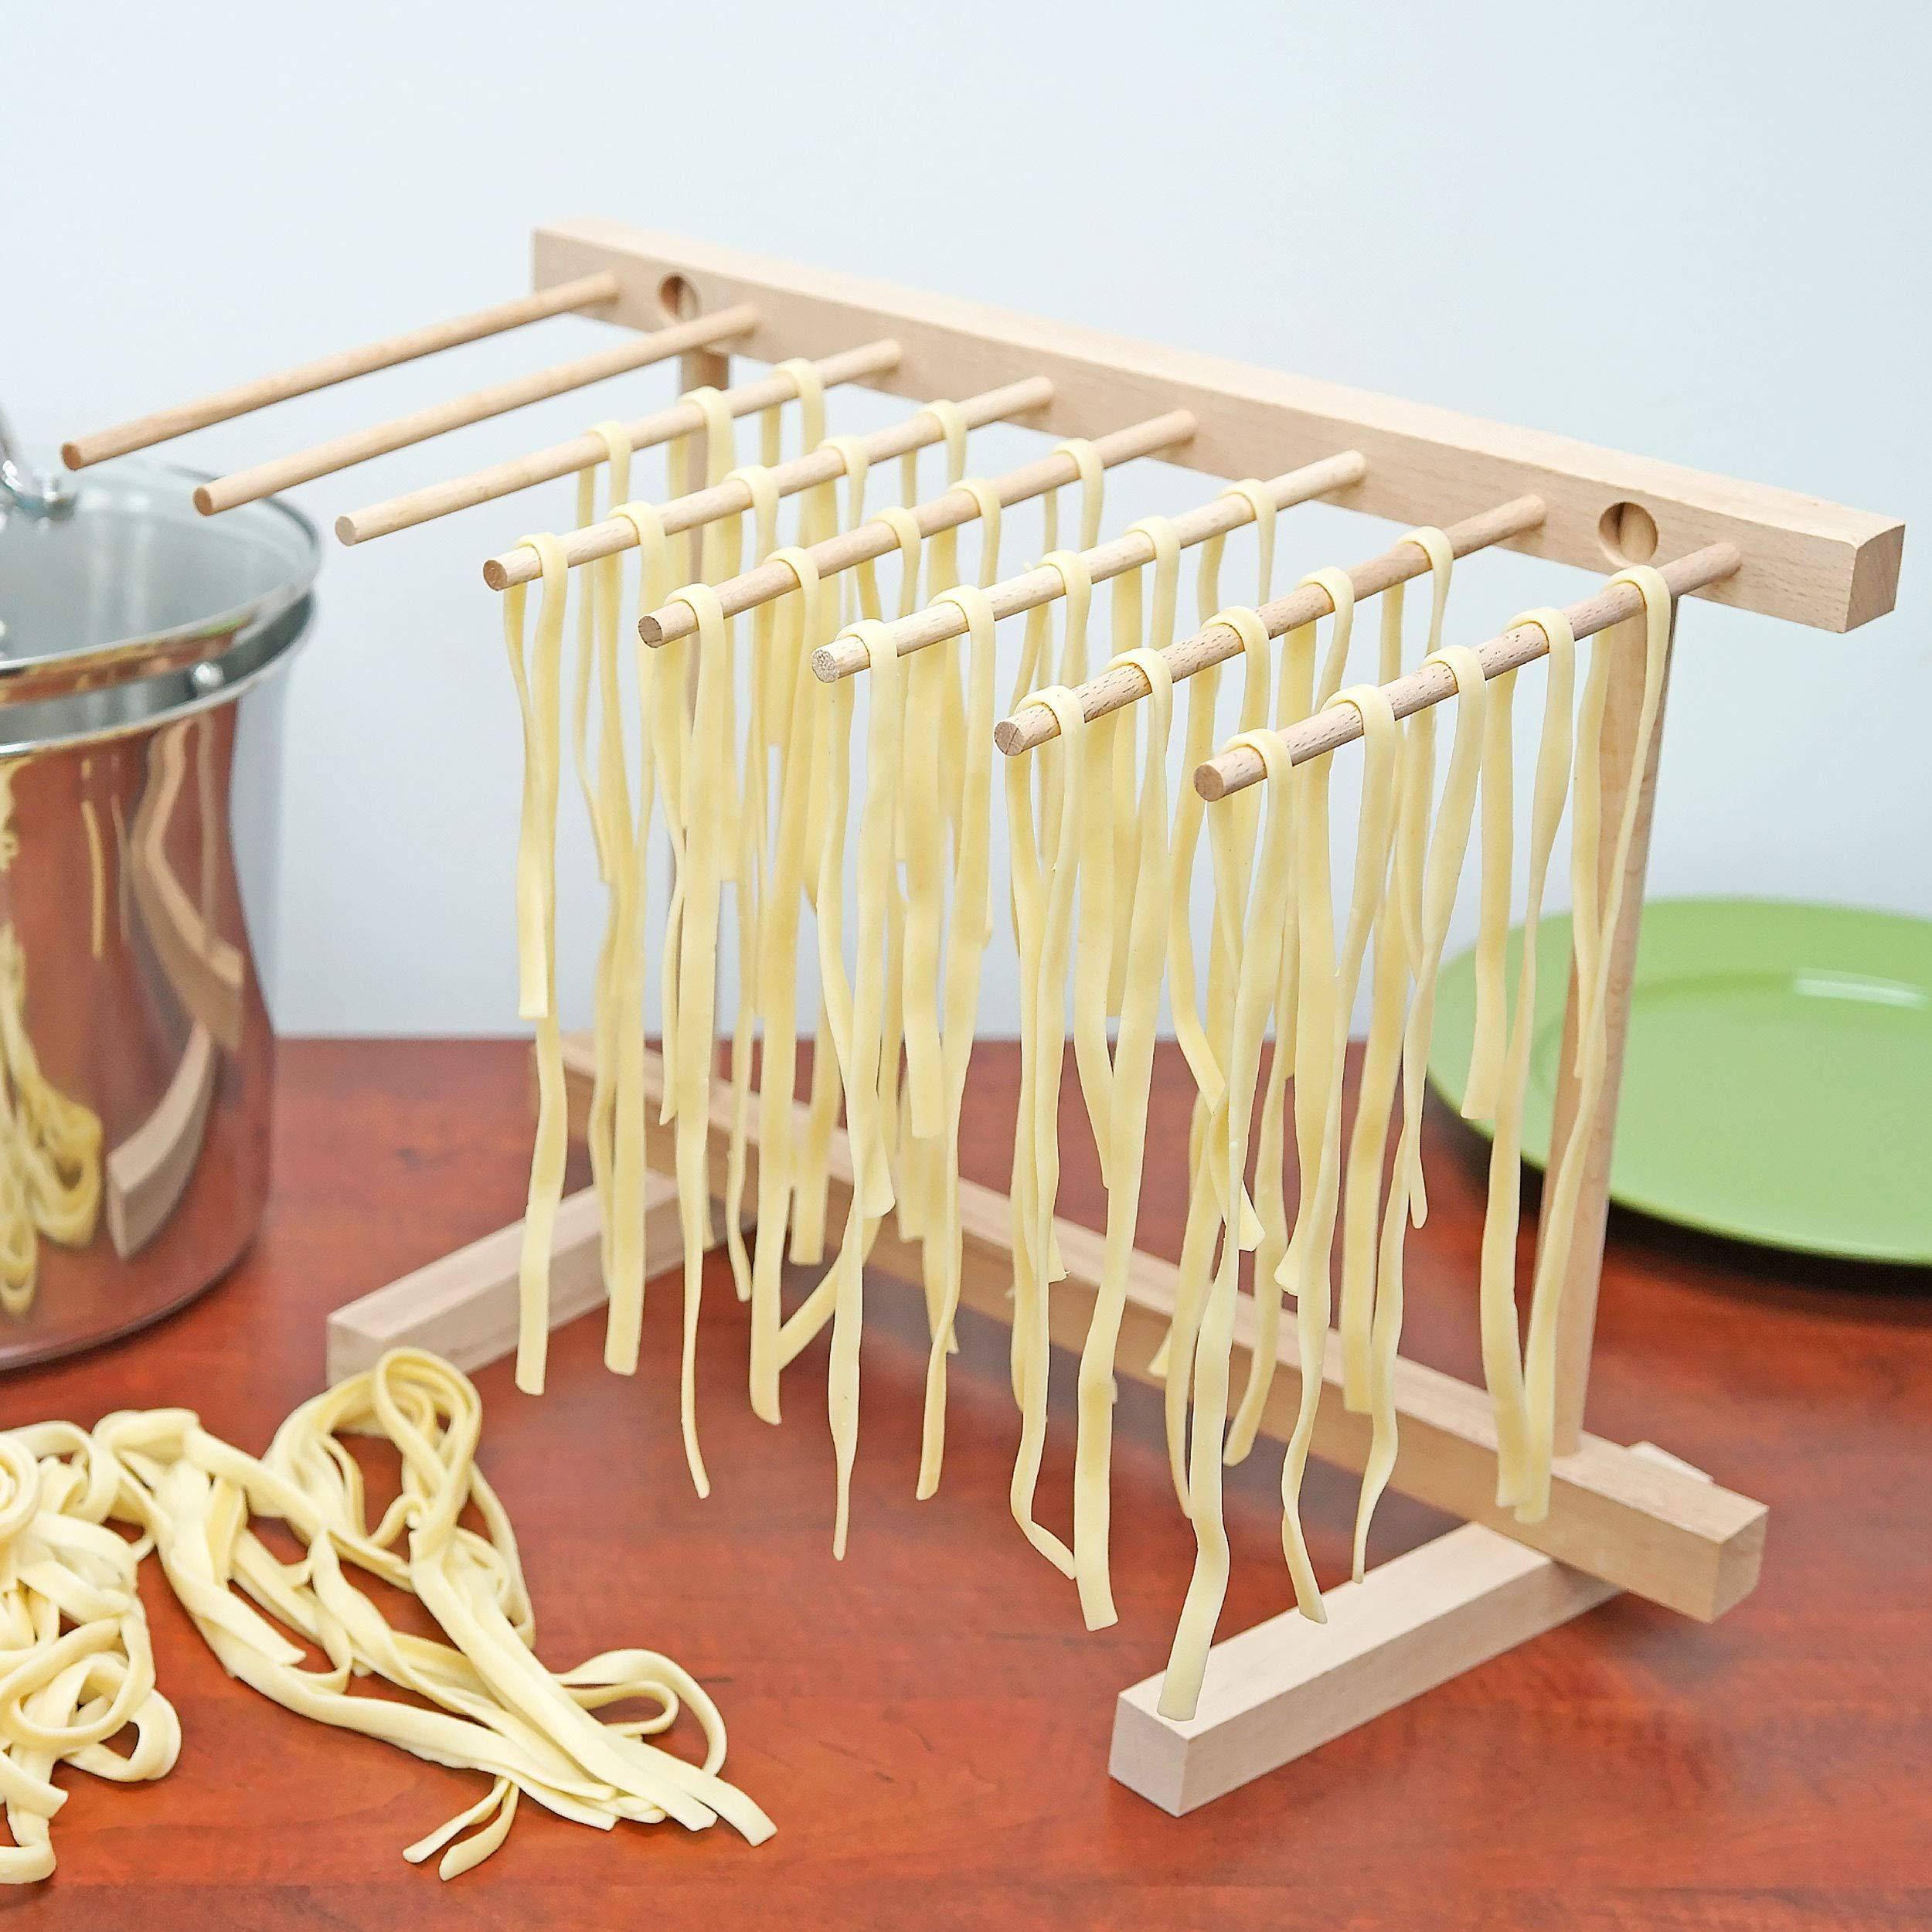 Southern Homewares SH-10153 Collapsible Wooden Pasta Drying Rack Brown Natural Beechwood One Size